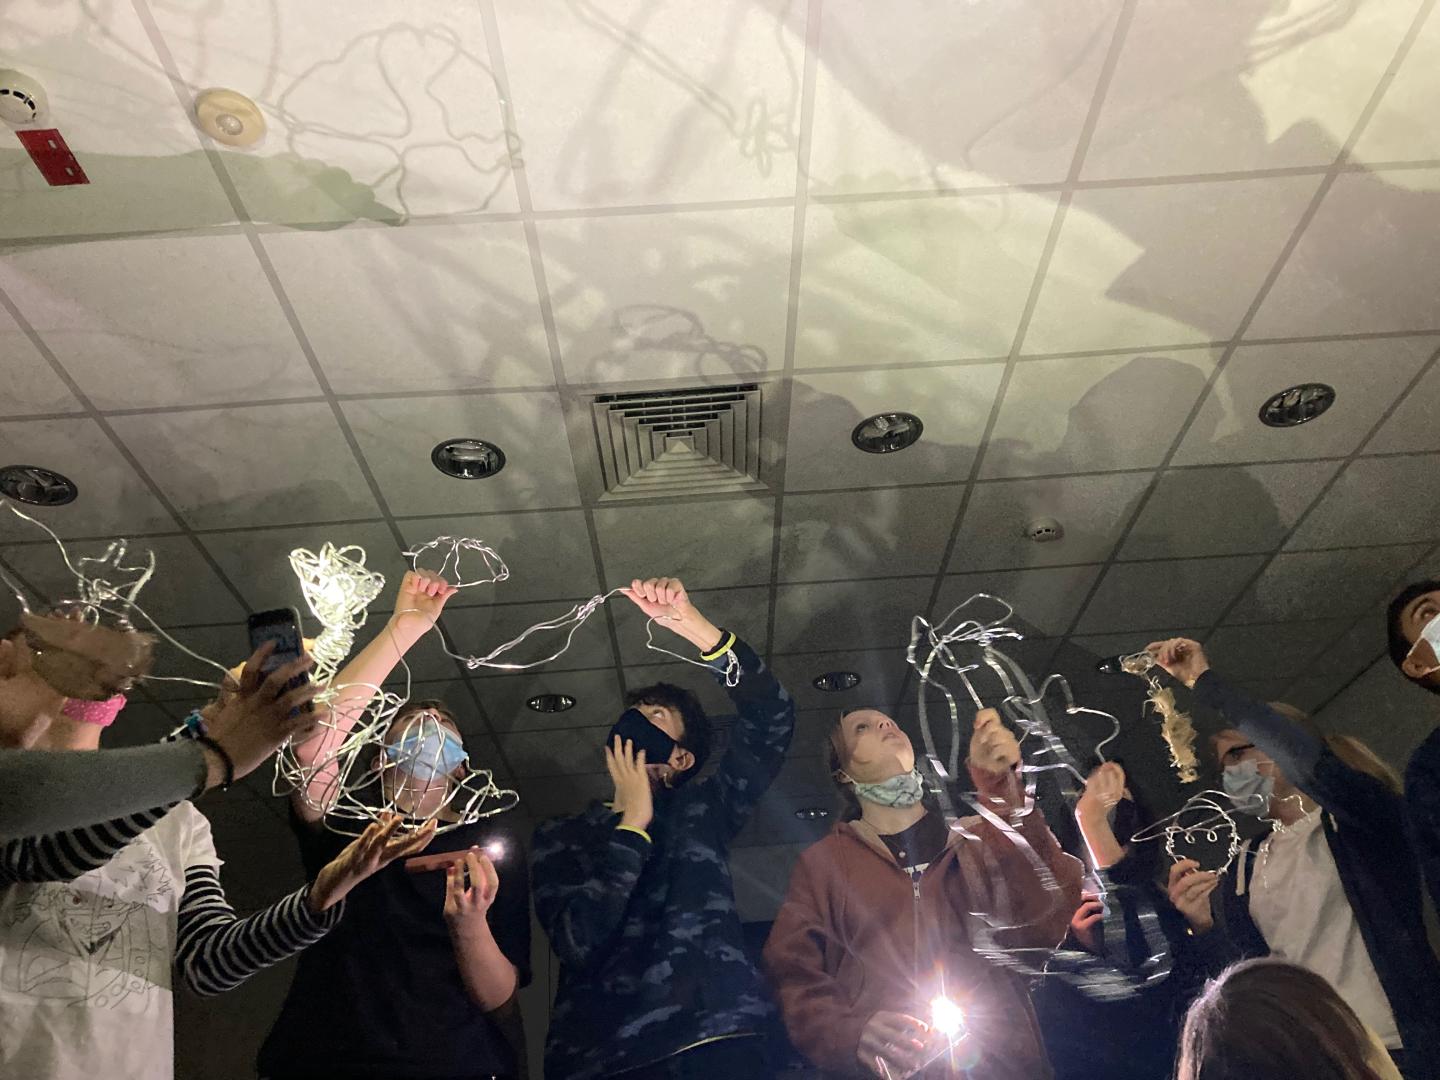 A group of young people looking at shadows on ceiling created by wire sculptures in front of light source